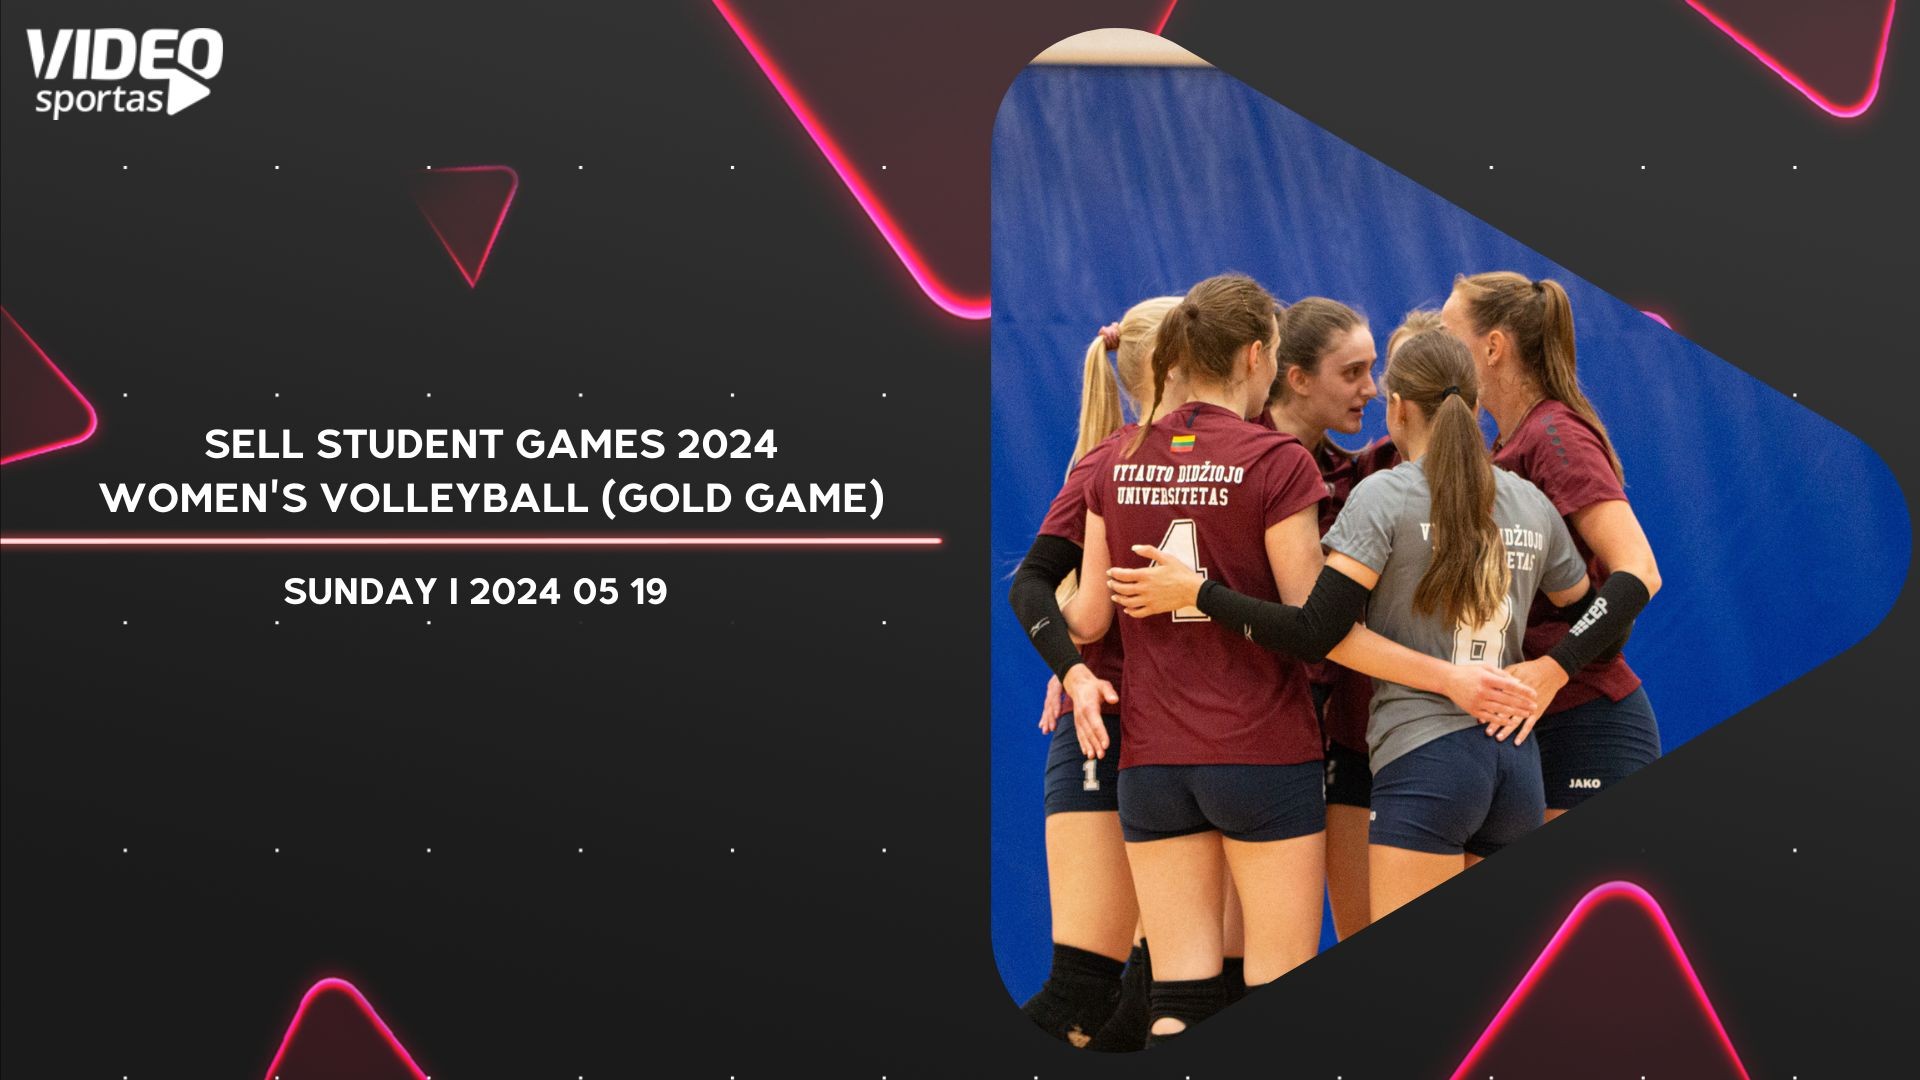 GOLD GAME - SELL STUDENT GAMES 2024 (WOMEN'S VOLLEYBALL)